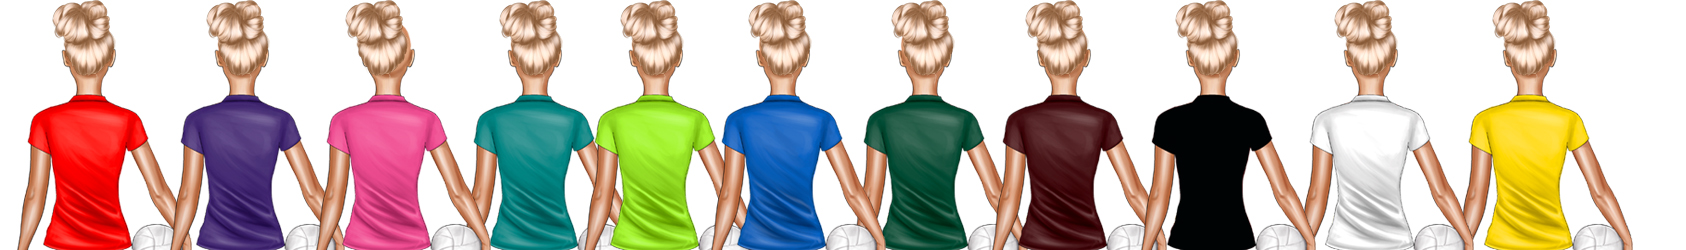 volleyball-jersey-color-row.jpg